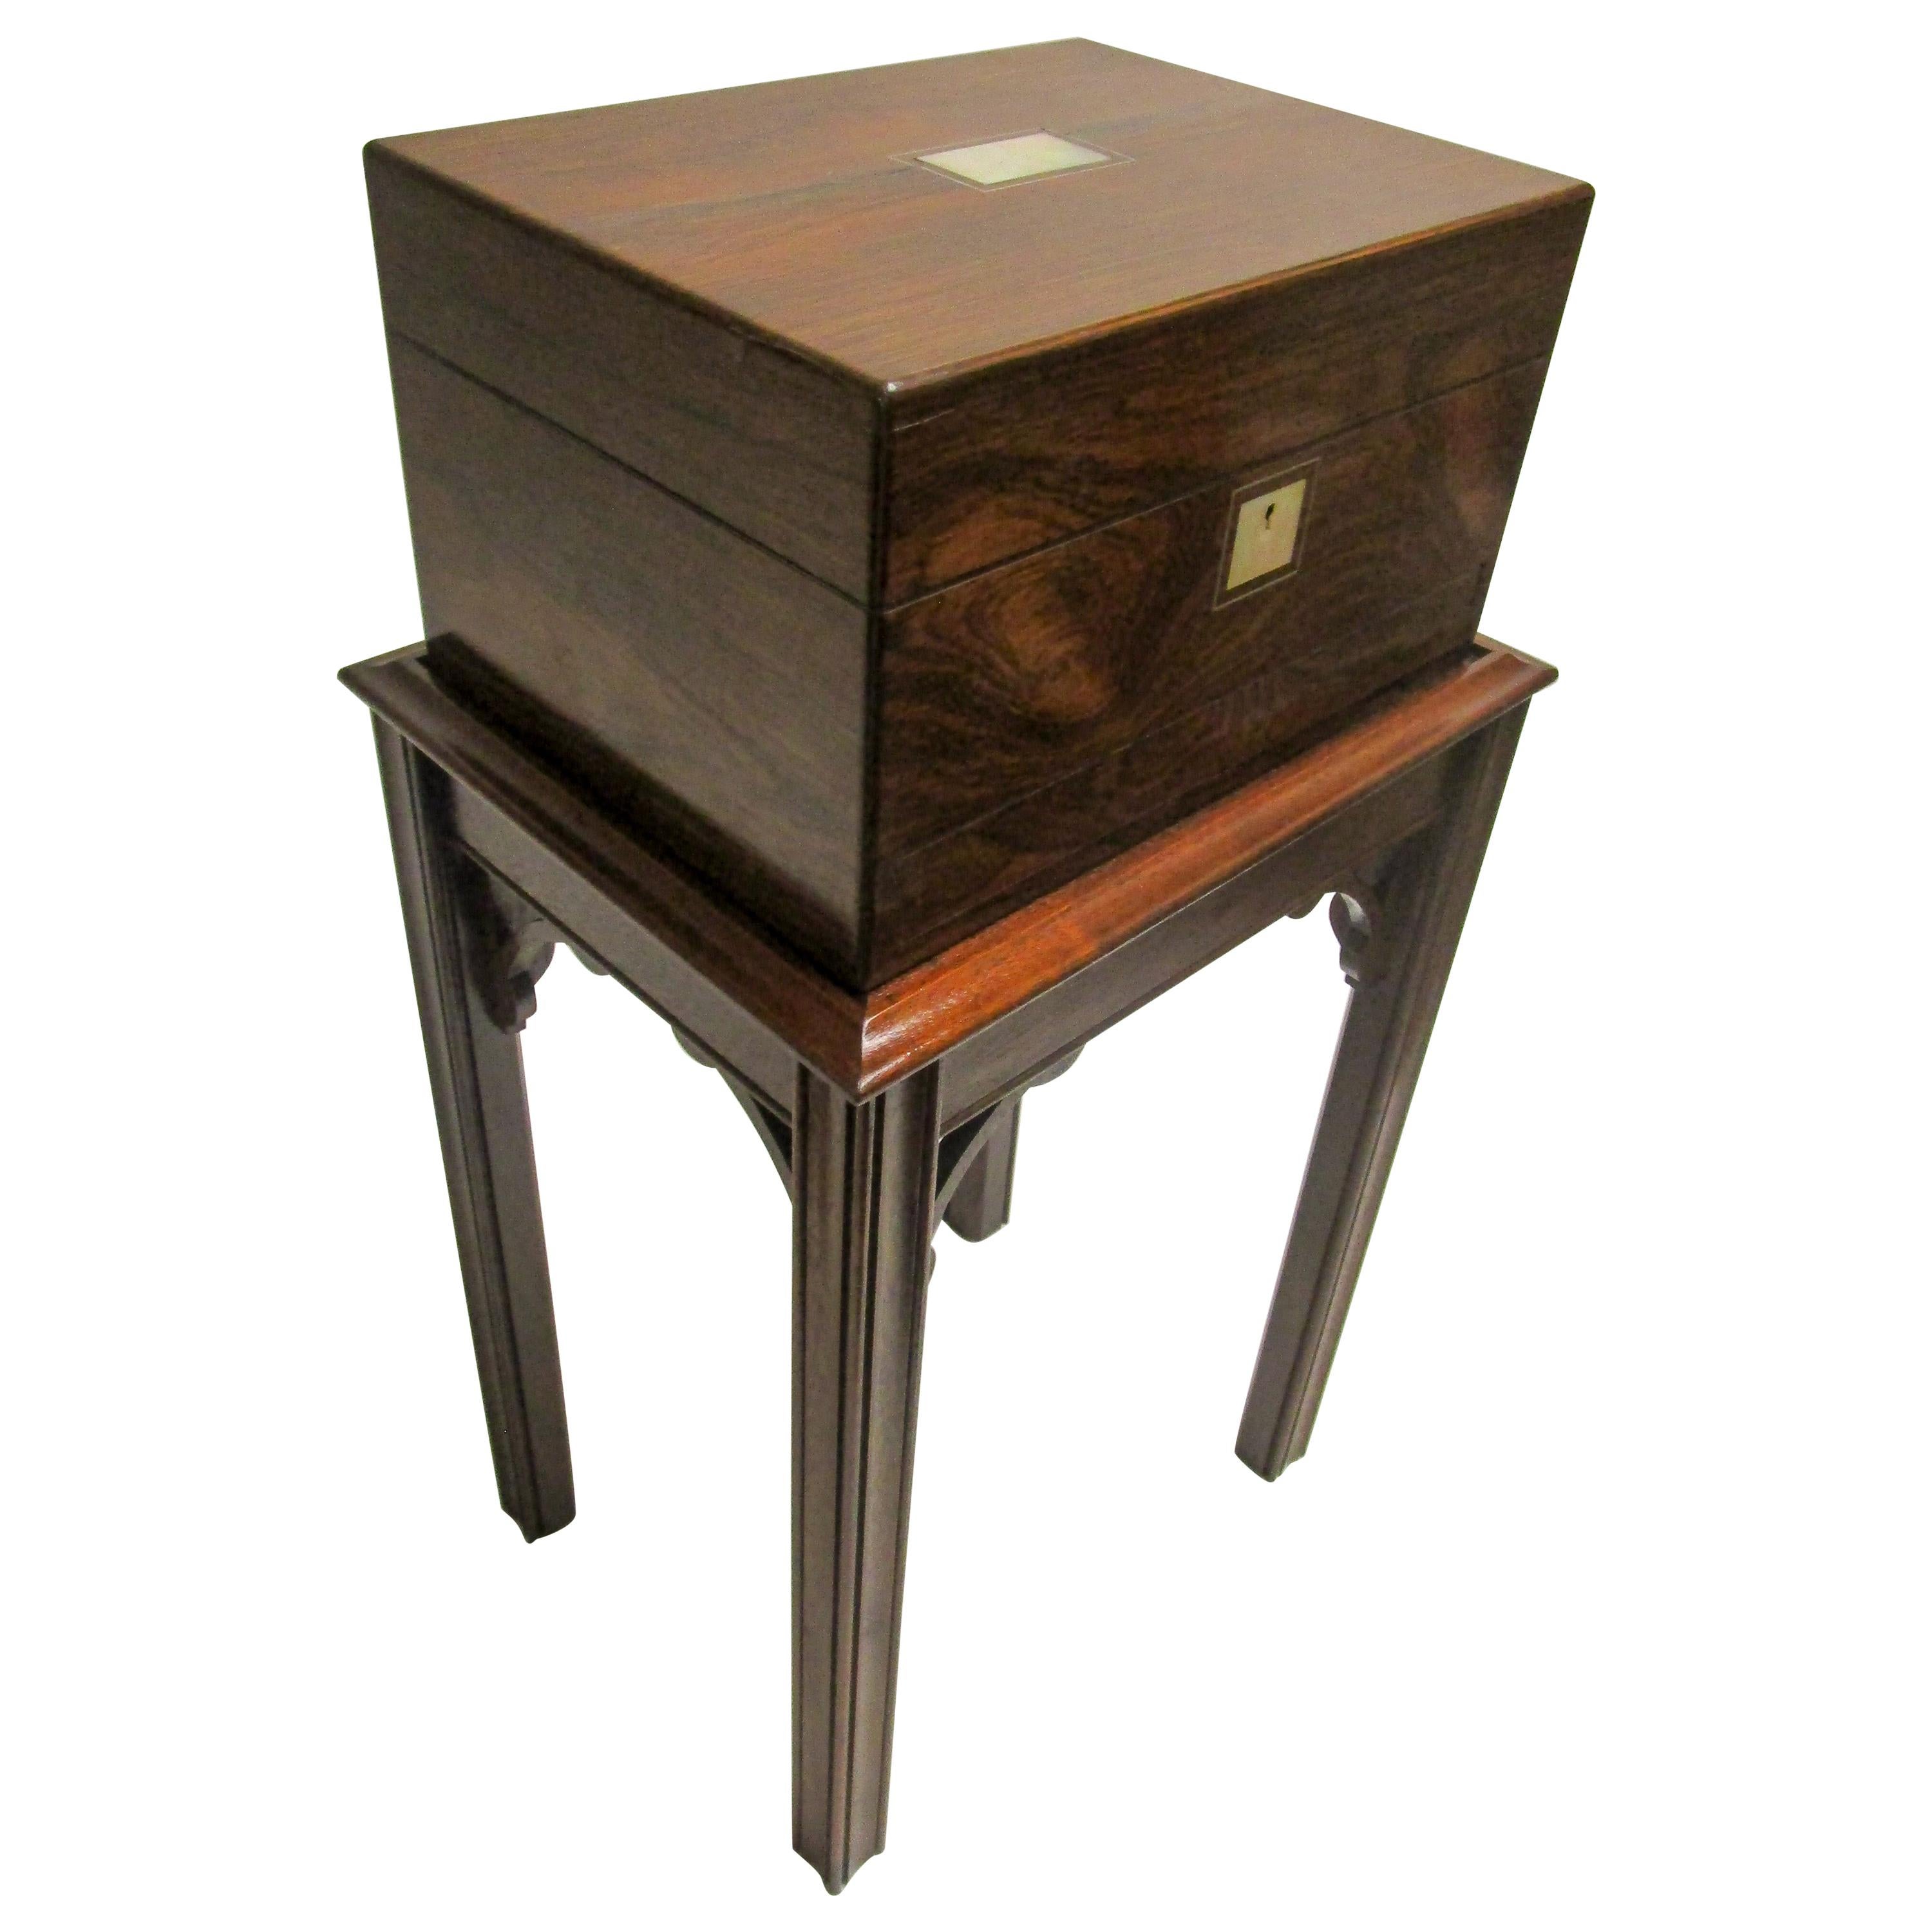 Rosewood Gentleman's Military Campaign Vanity Box with Secret Drawer